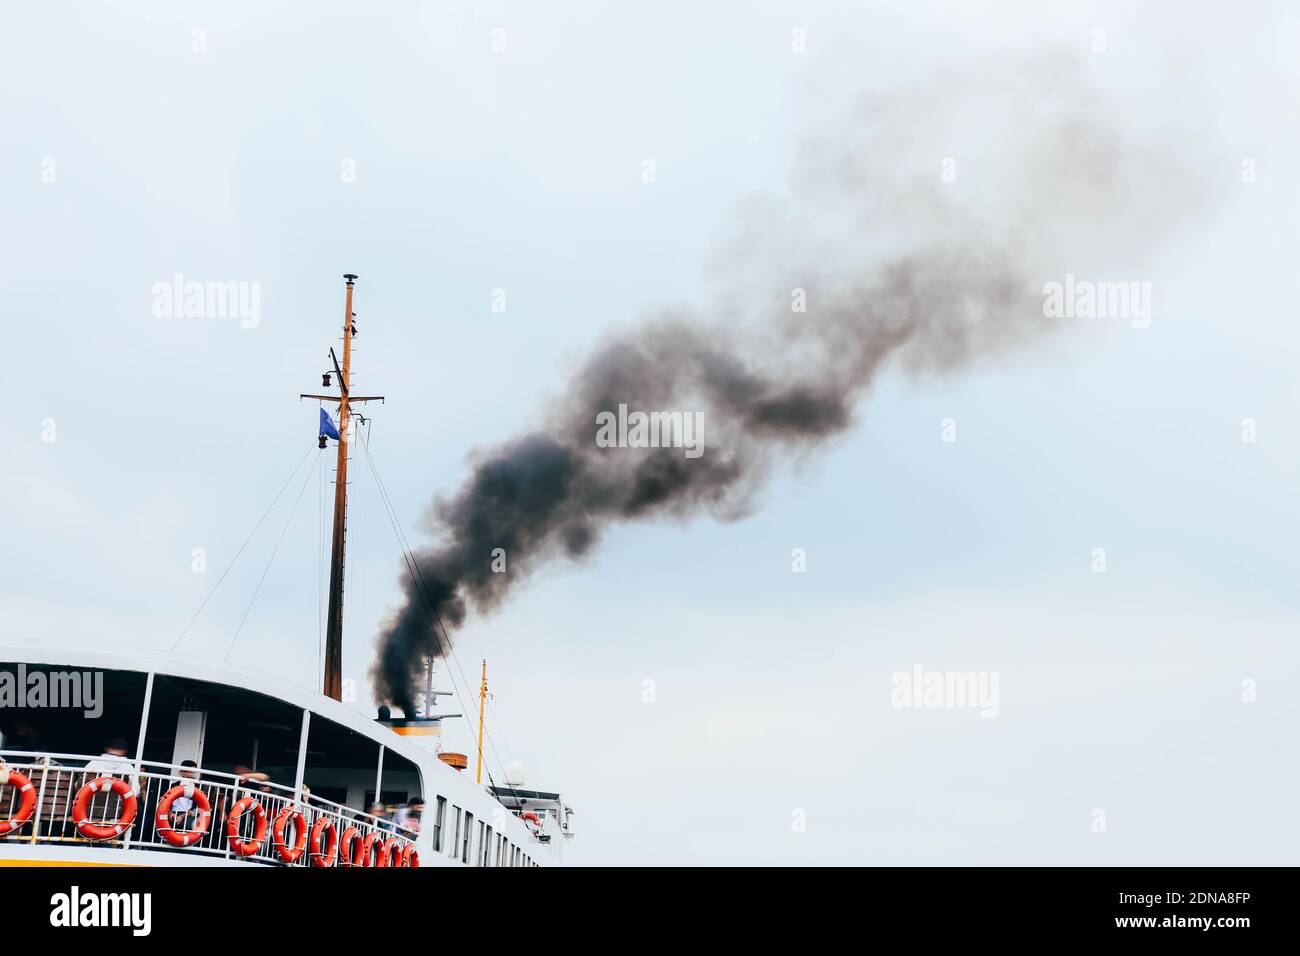 Ship polluting air with toxic smoke on blue sky background. Concept of public health problem in populated areas Stock Photo